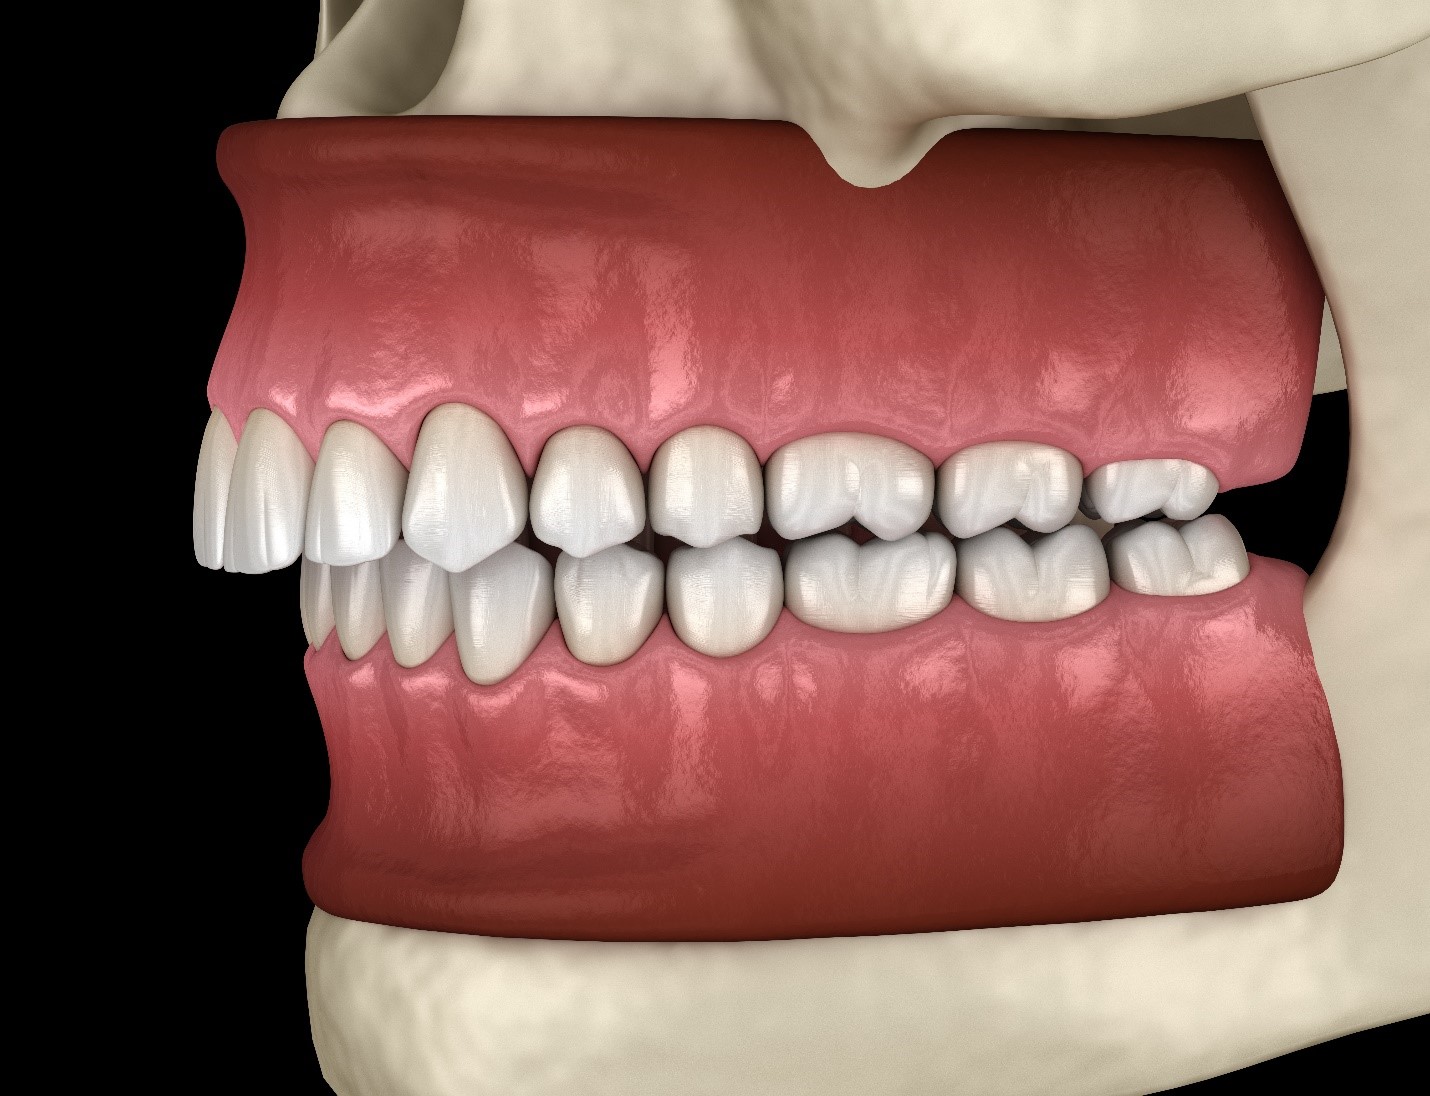 Illustration of overbite a bite problem that Invisalign can